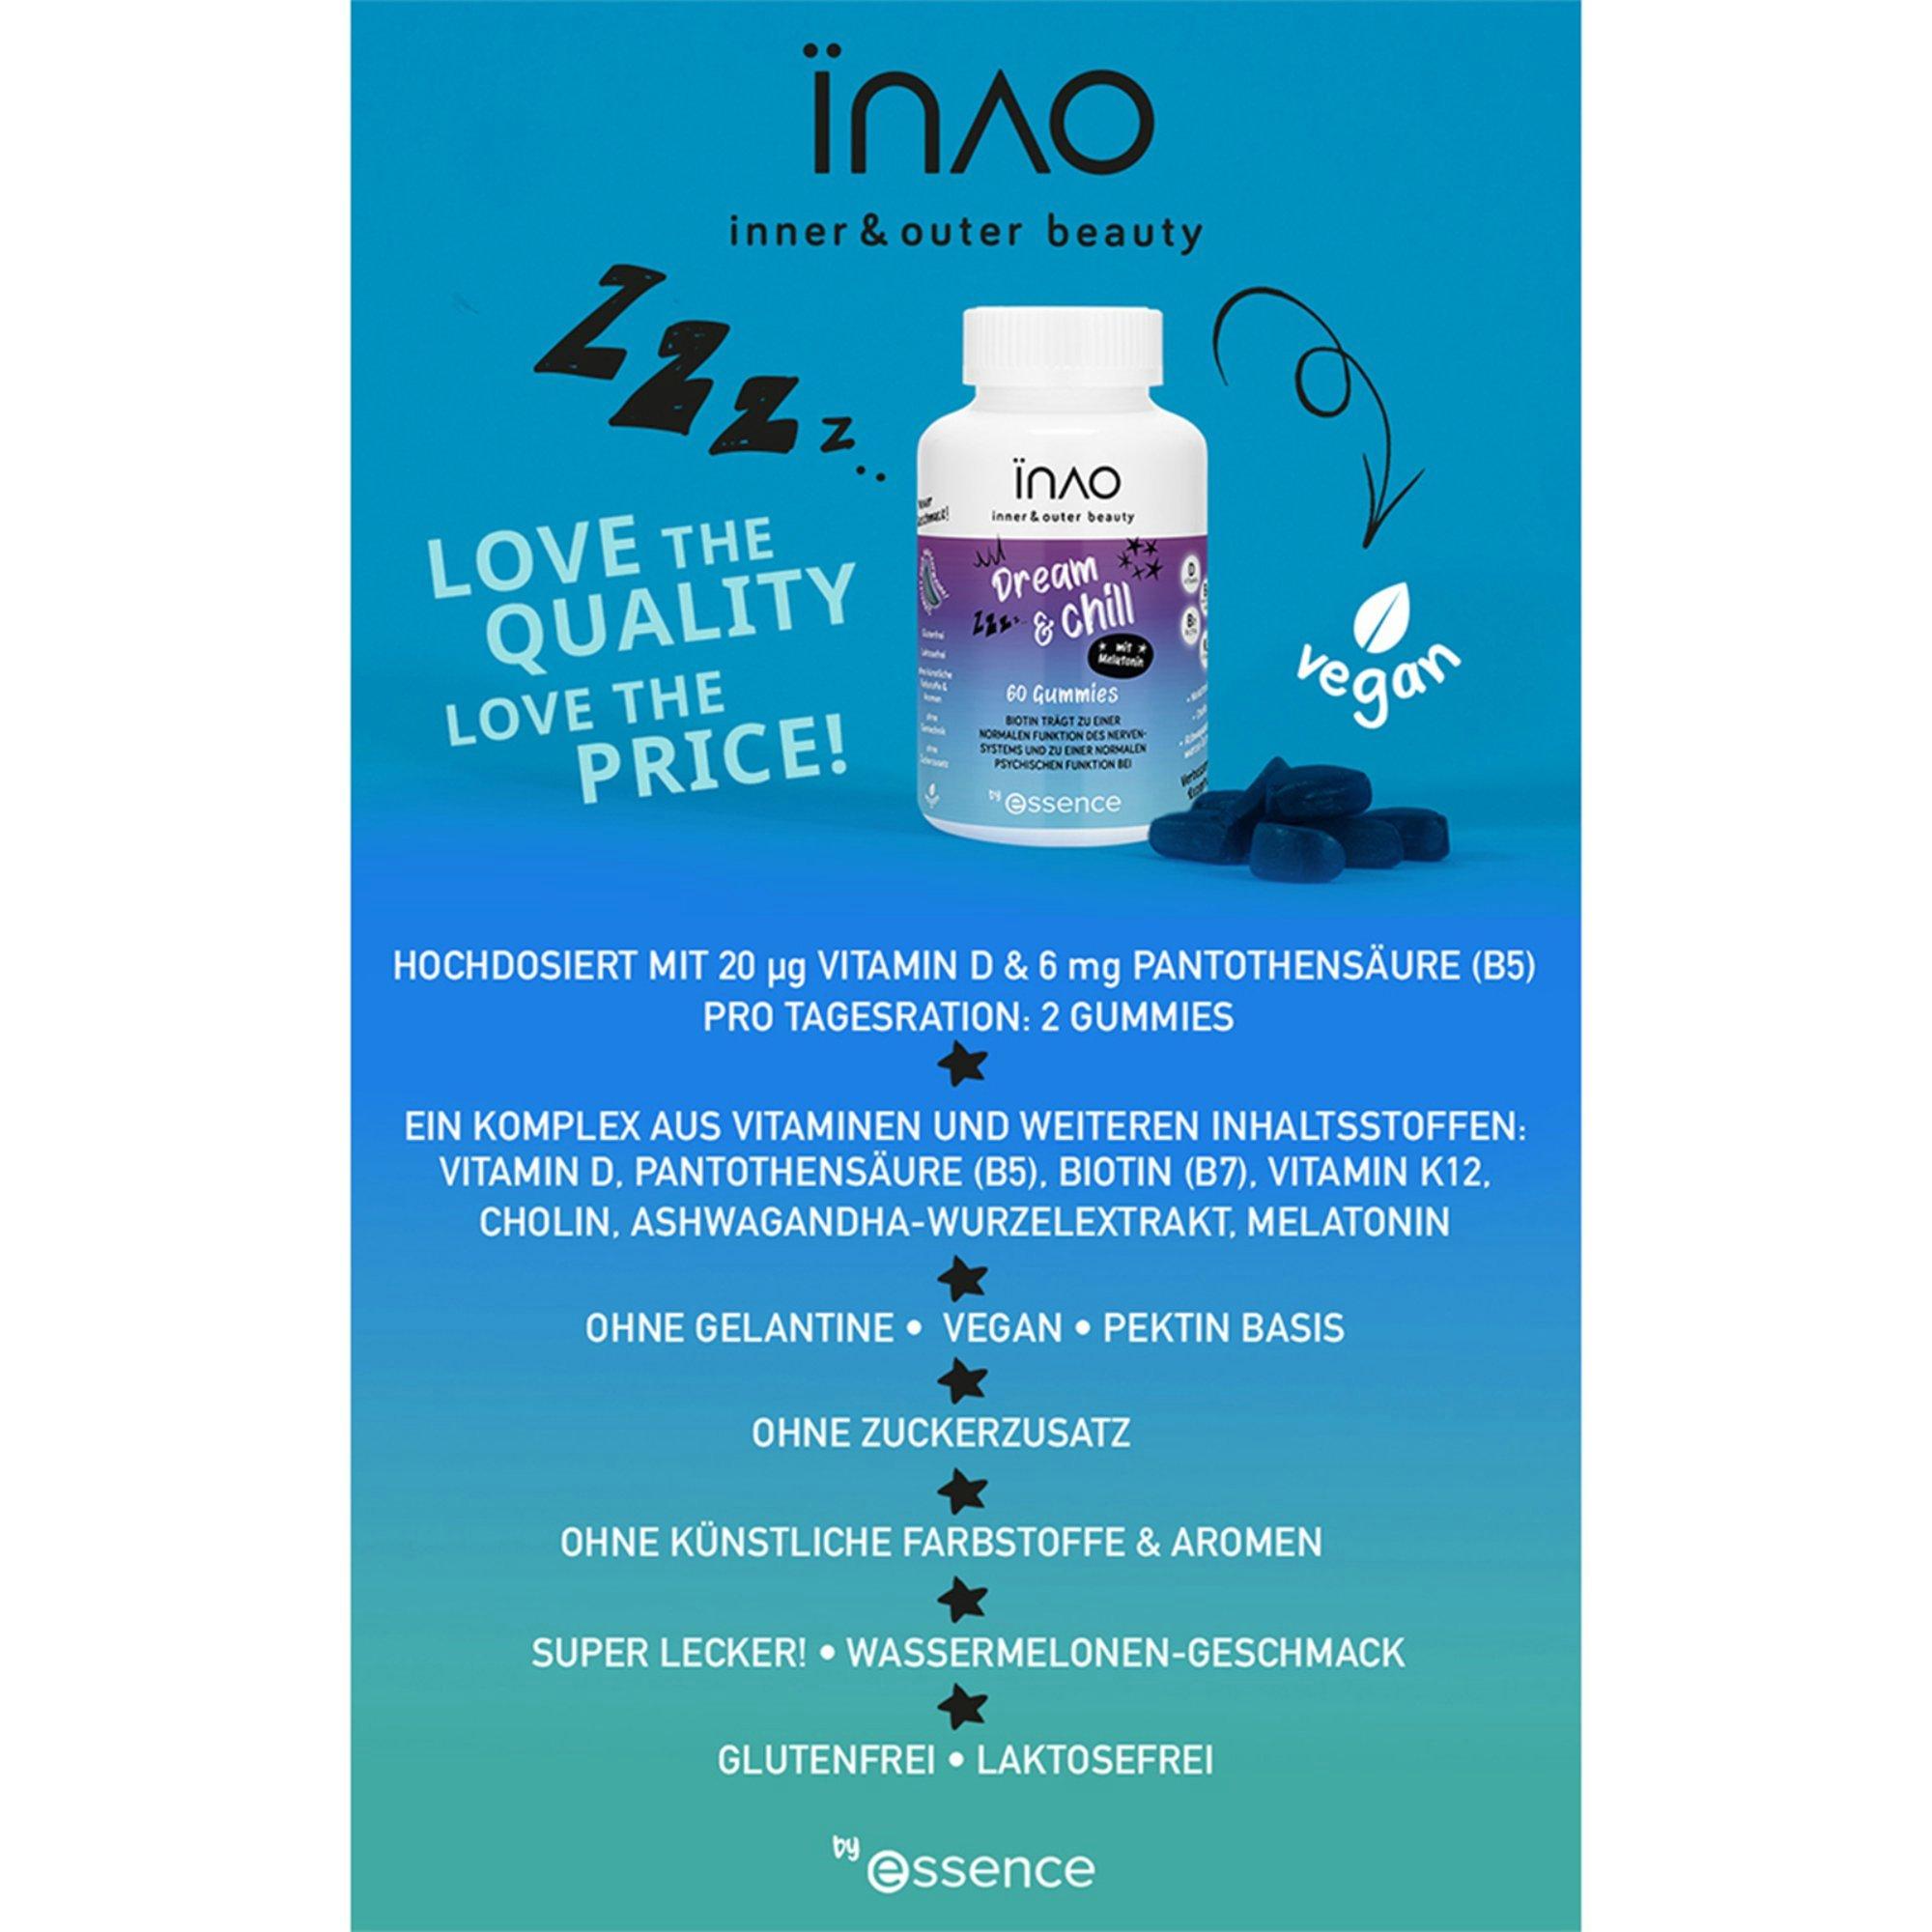 INAO inner and outer beauty Dream and Chill gummies by essence